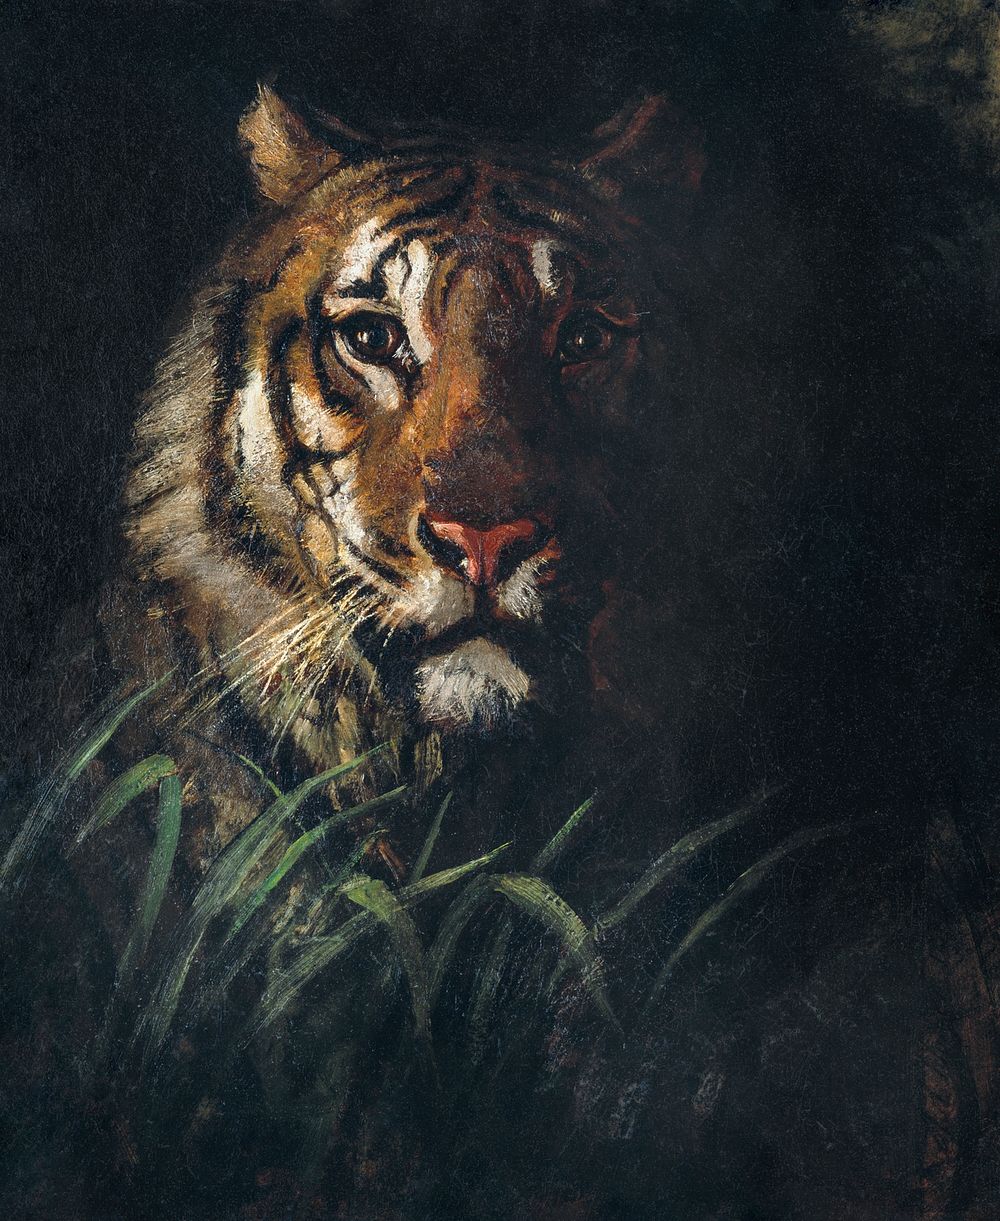 Tiger's Head painting in high resolution by Abbott Handerson Thayer (1849&ndash;1921). Original from the Smithsonian…